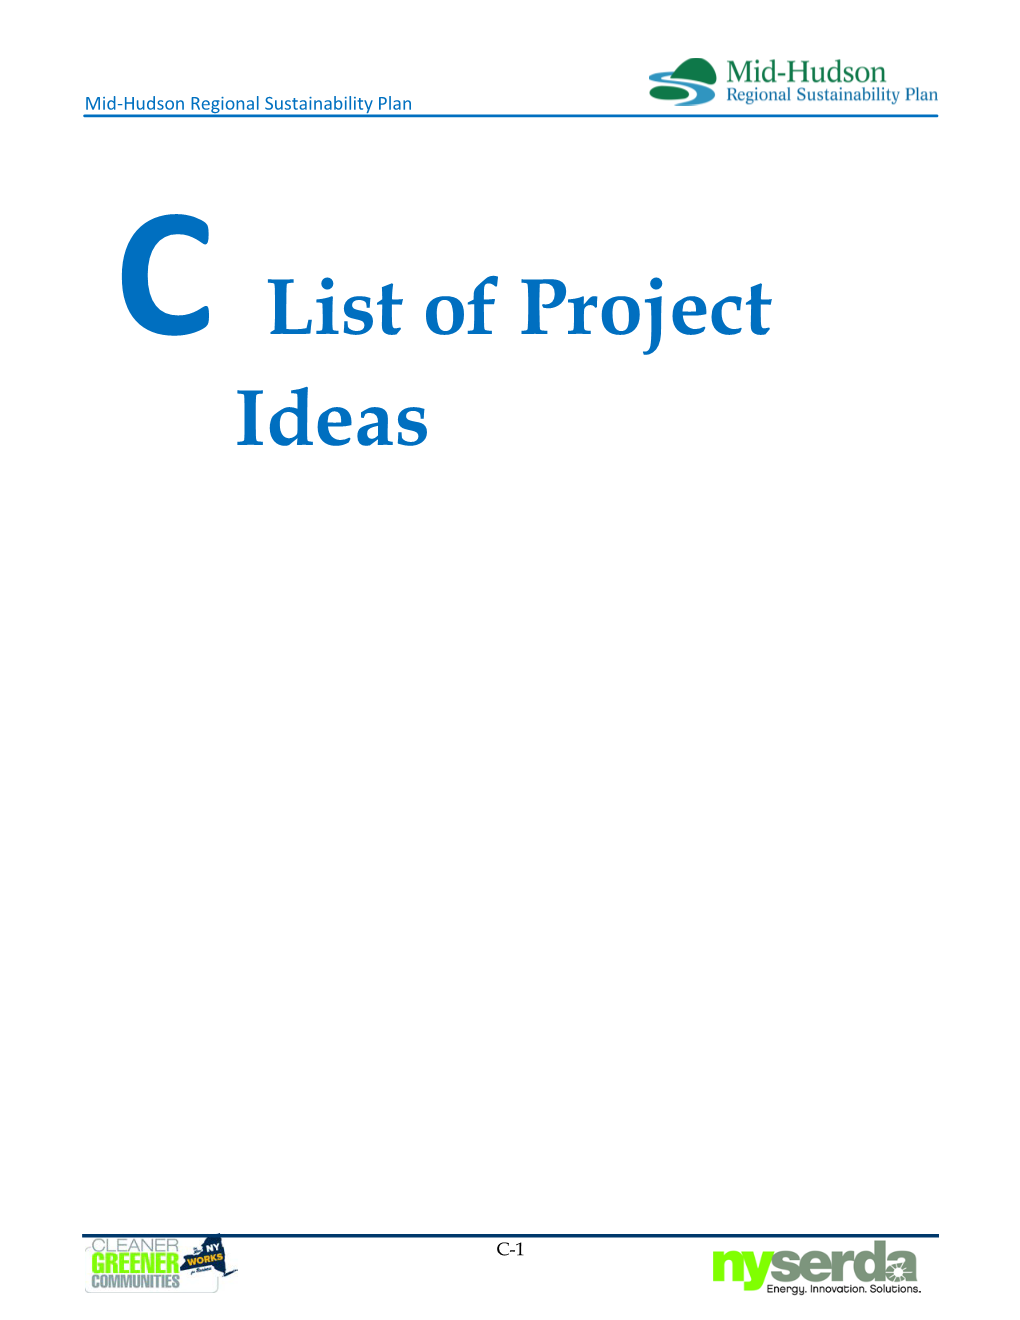 List of Project Ideas